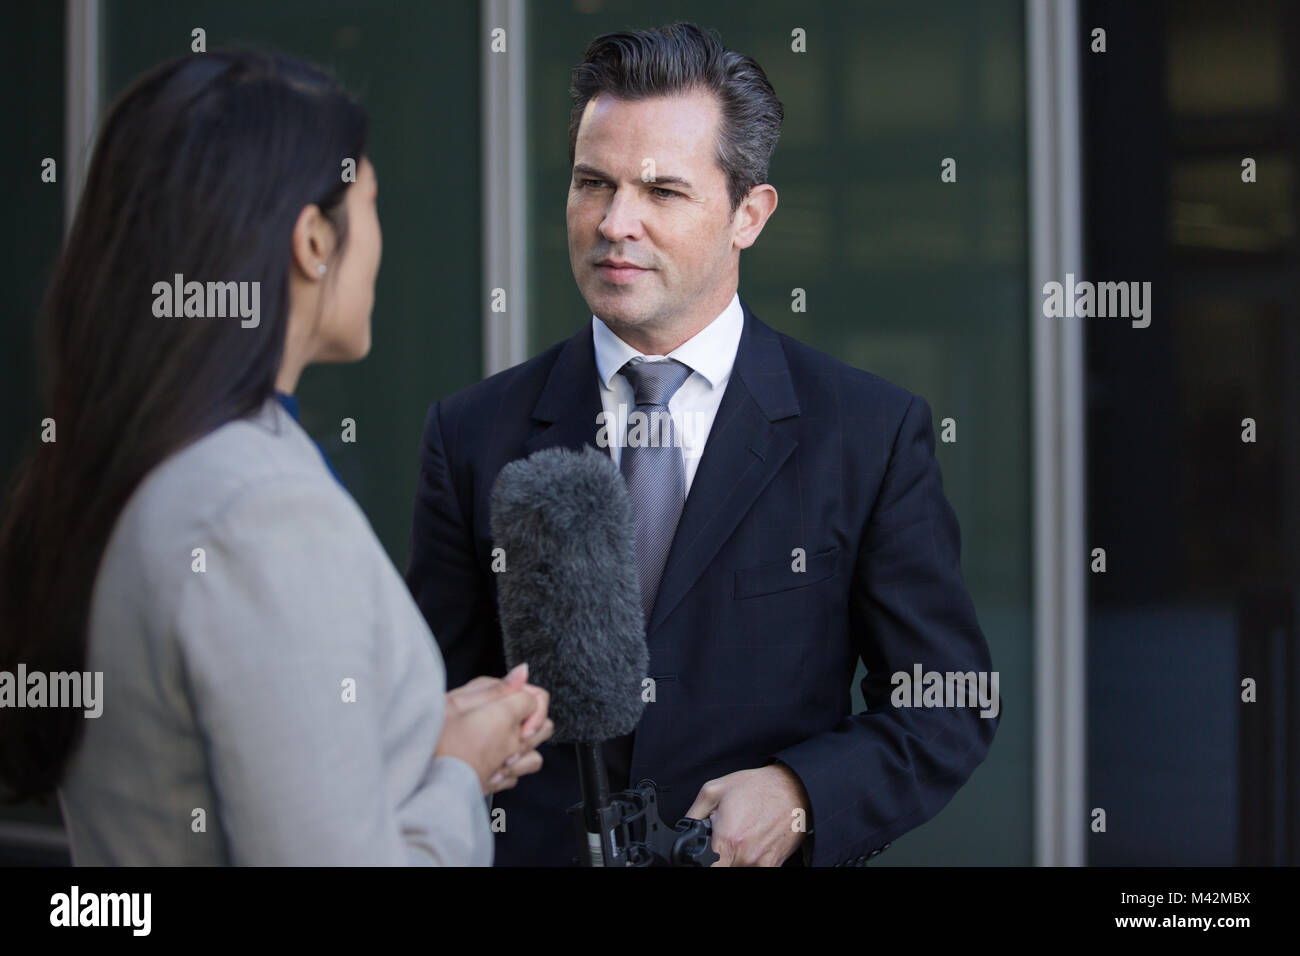 Politician being interviewed on the street Stock Photo